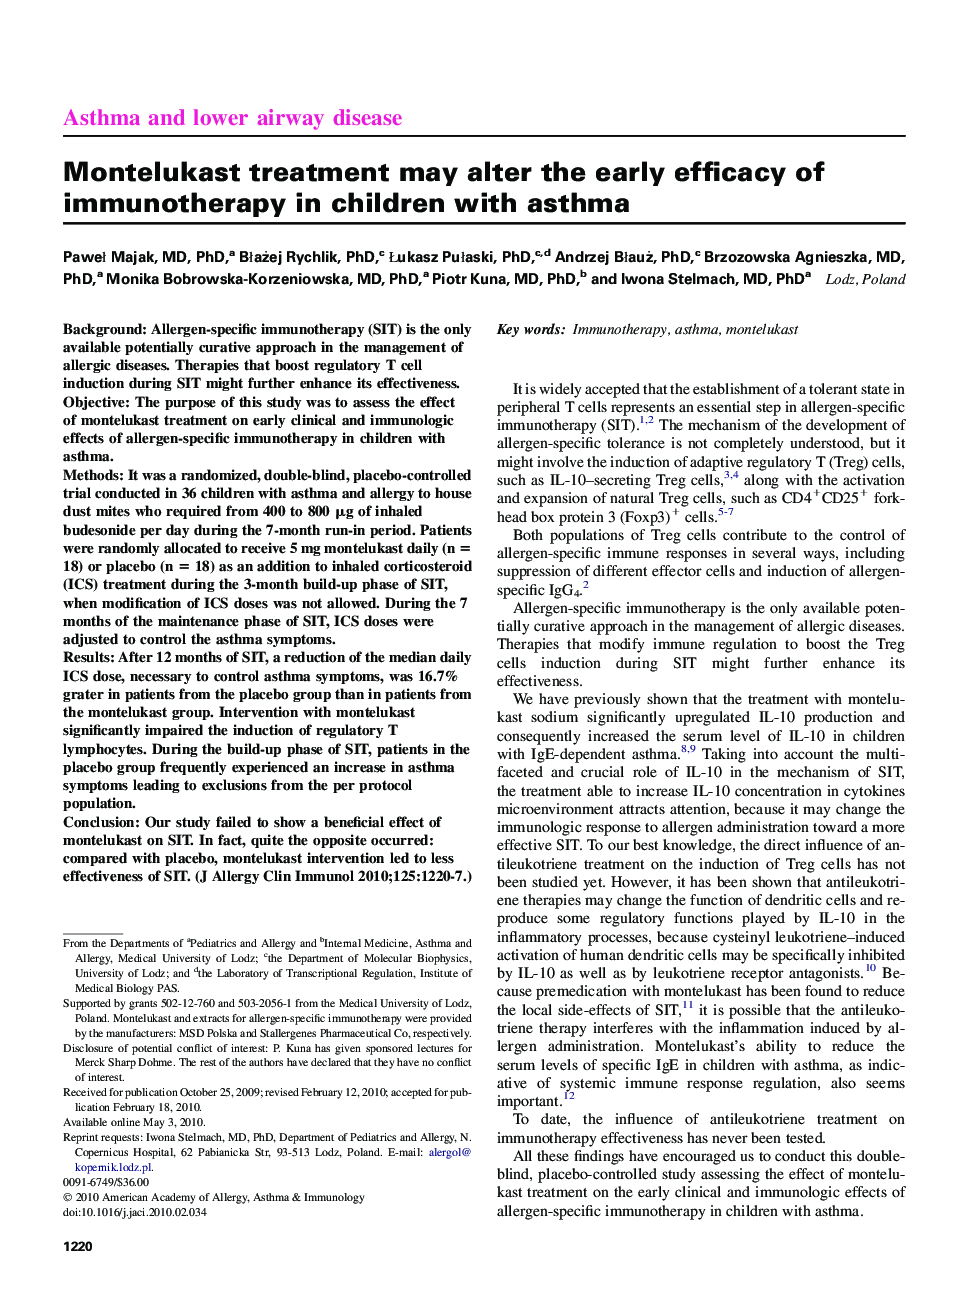 Asthma and lower airway diseaseMontelukast treatment may alter the early efficacy of immunotherapy in children with asthma